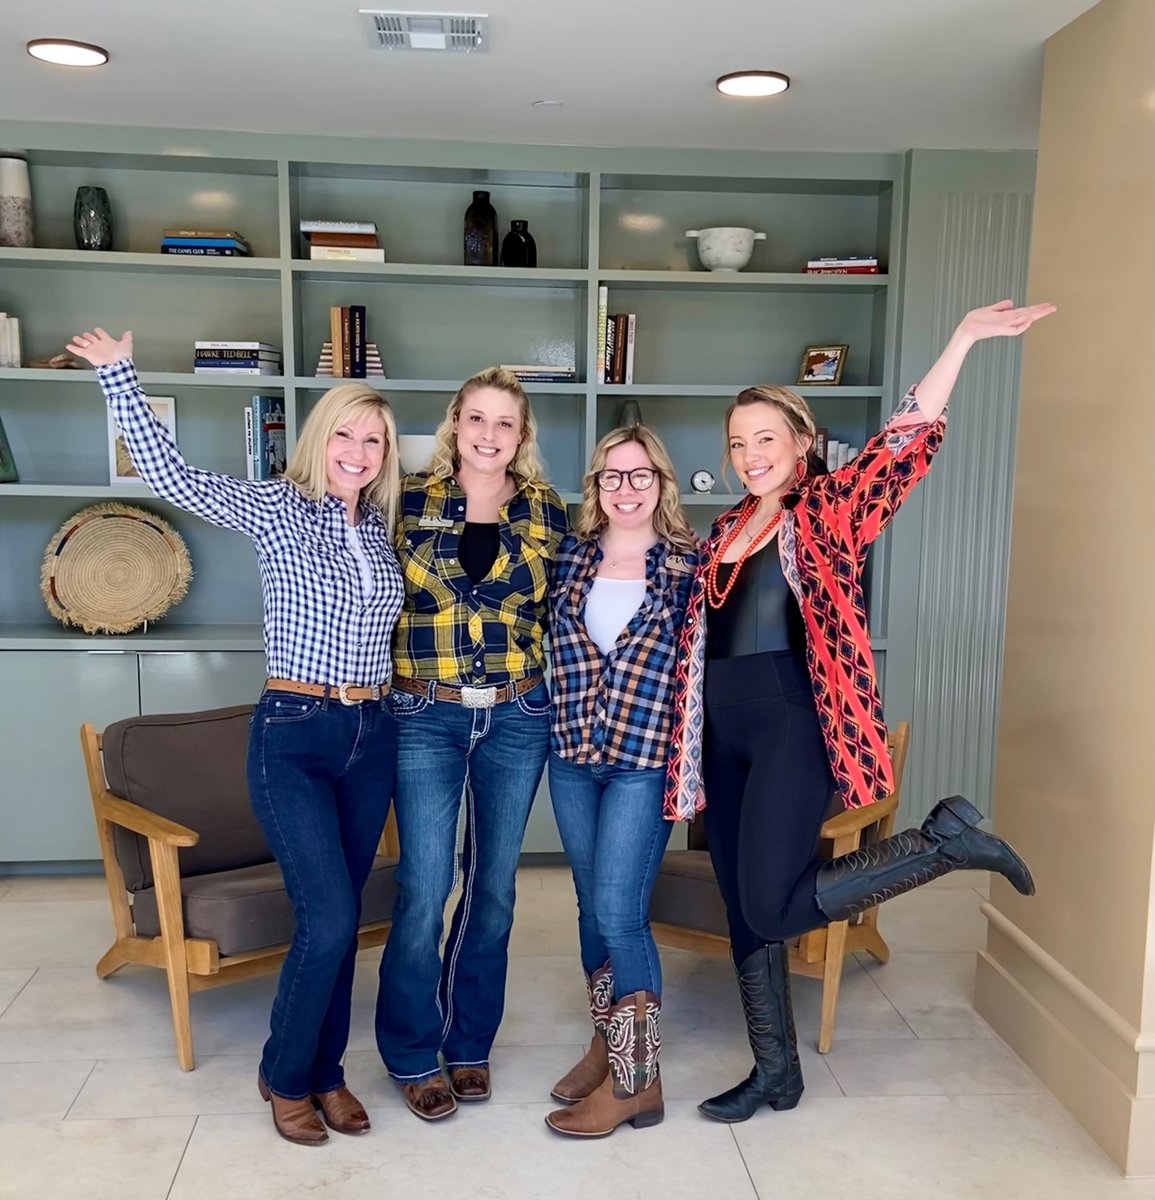 Happy Go Texan Day from the leasing ladies at #ModeraSixPines #HappyFriday #RodeoKickoff #ModeraLife #MillCreekRes